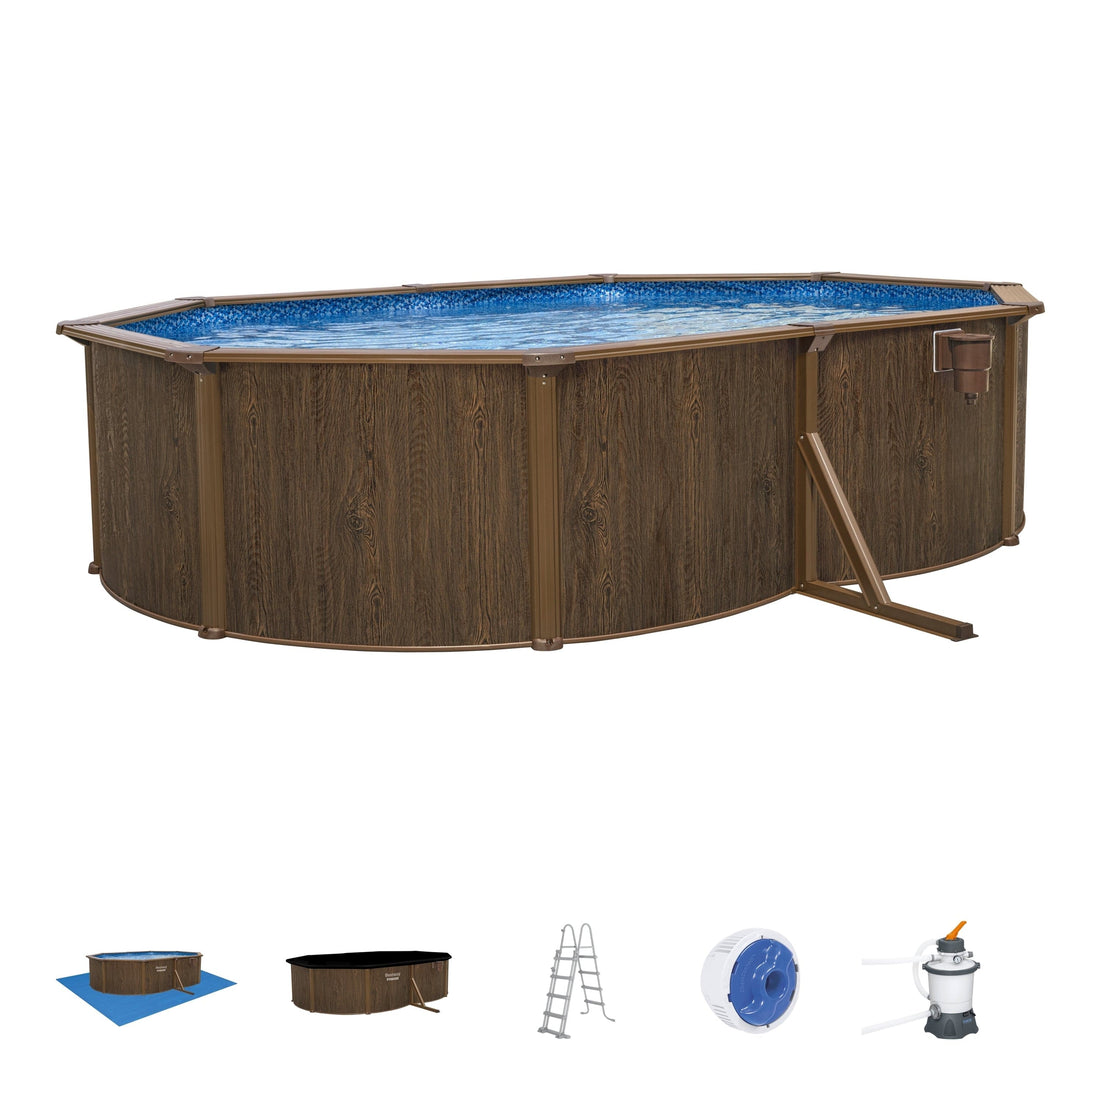 HYDRIUM POOL WOOD OVAL 5X3,60X1,20M SAND FILTER COVER AND BASE MAT